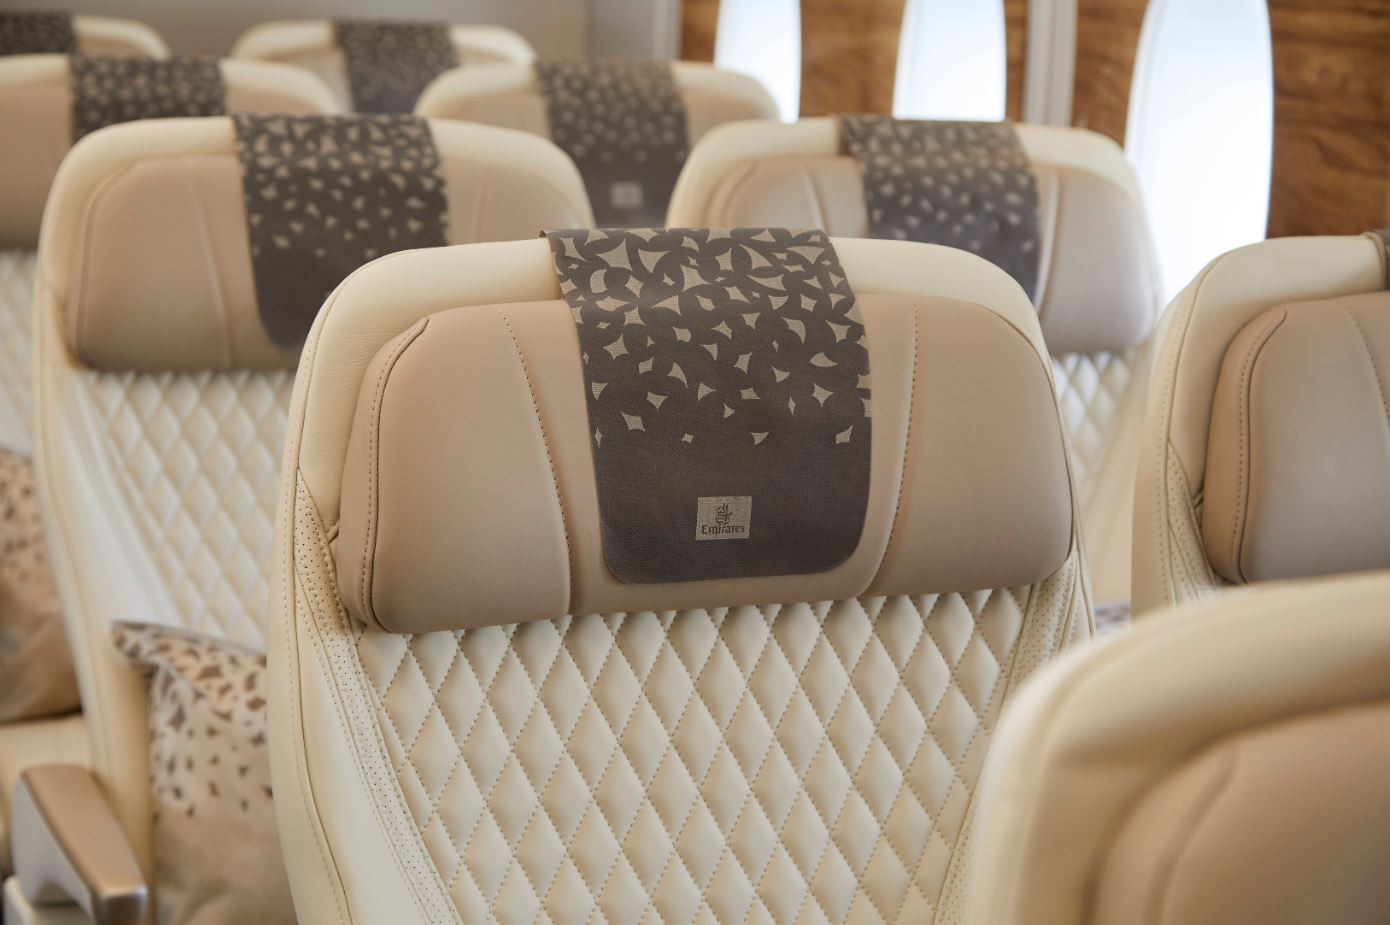 Emirates new premium economy. How Emirates is taking its A380 luxury to new heights